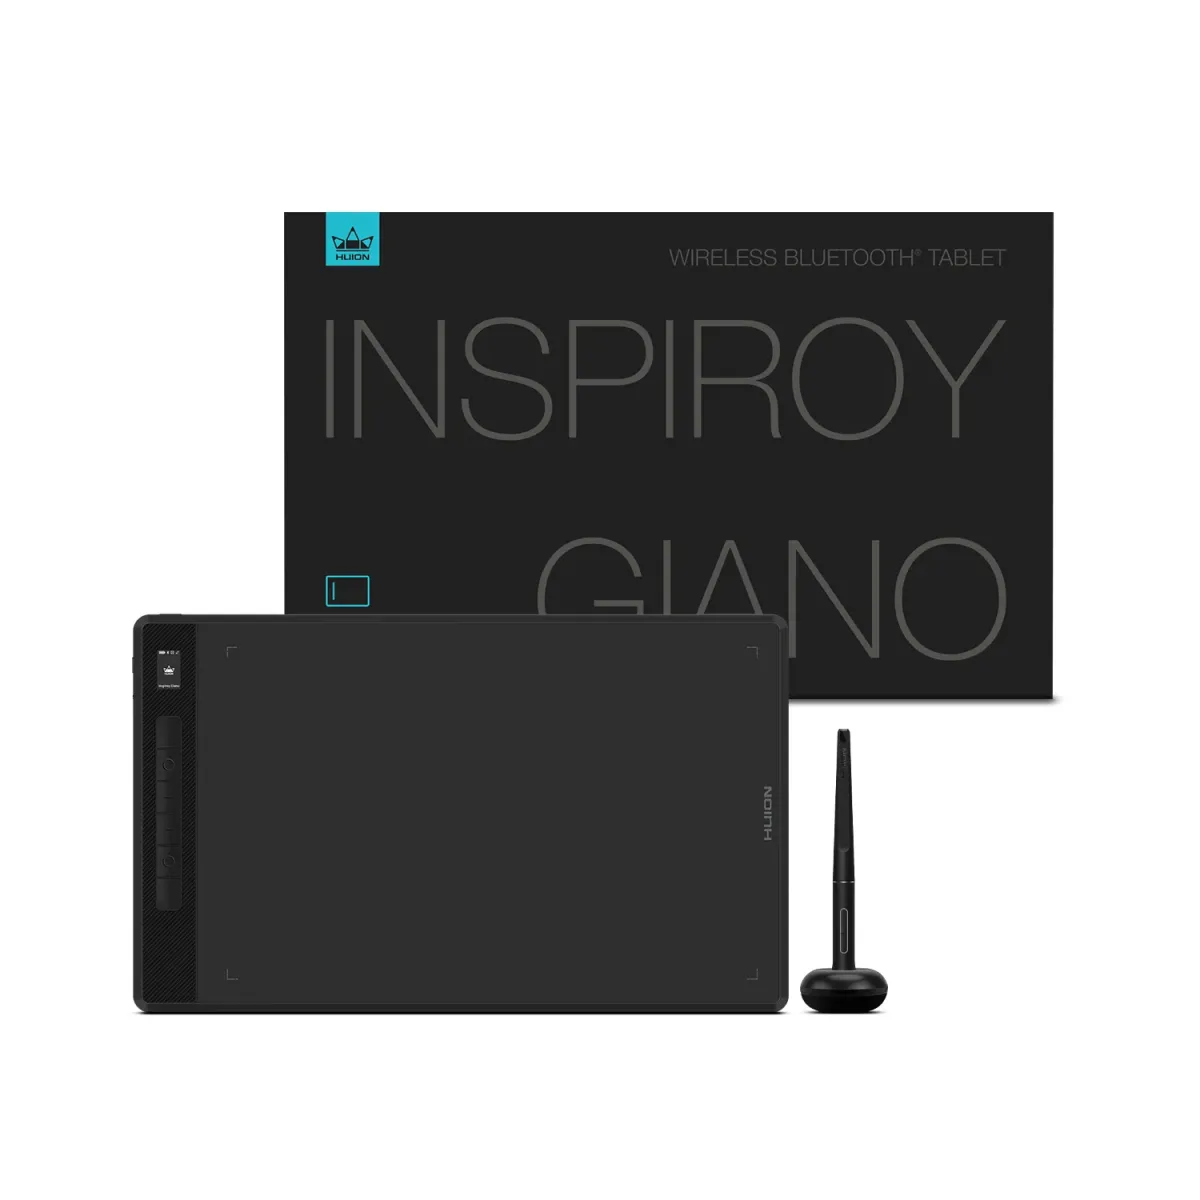 Huion 13.6 Largest Wireless Pen Tablet, 2500 mAh Big Battery and Bluetooth 5.0 | Inspiroy Giano G930L